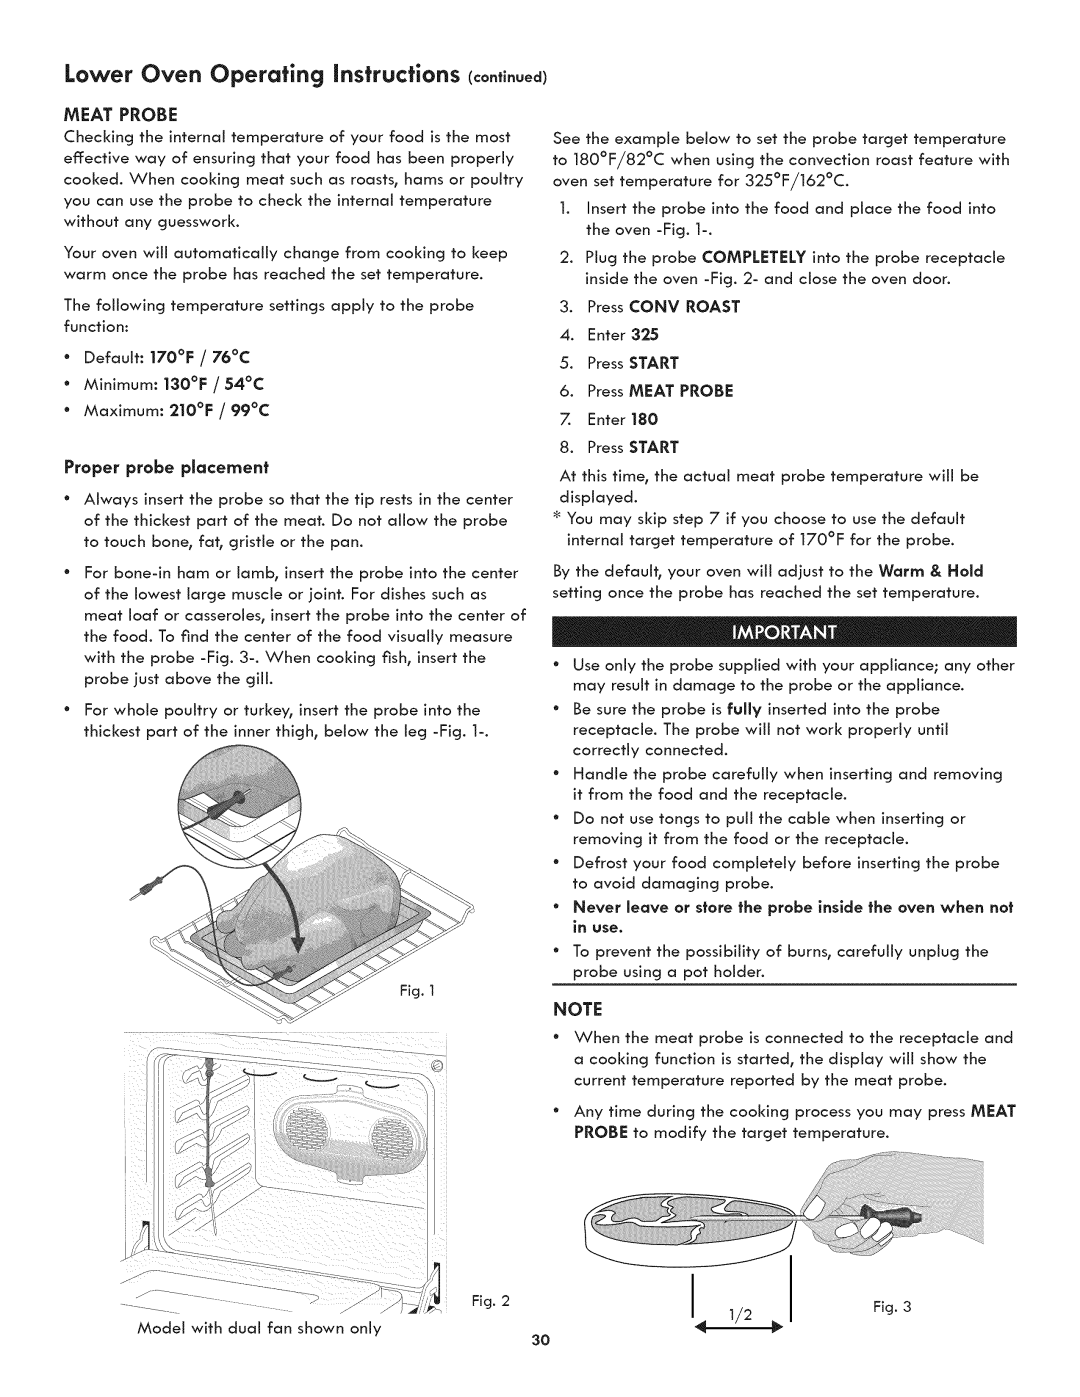 Kenmore 790.489 manual Lower Oven Operating instructions continued, Meat Probe, Proper probe placement, Maximum: 210F / 99C 